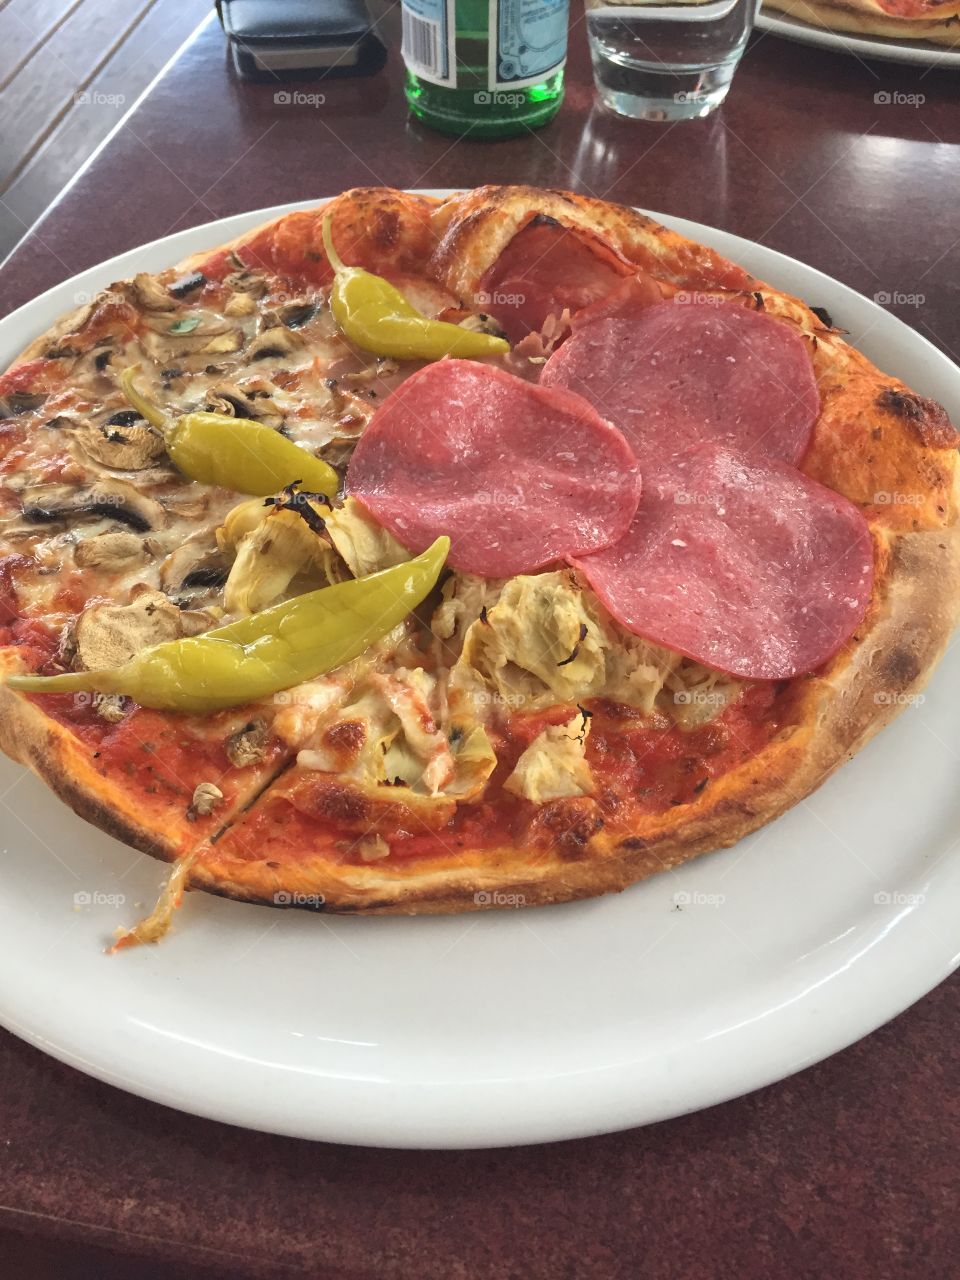 A slice of pizza in Germany 